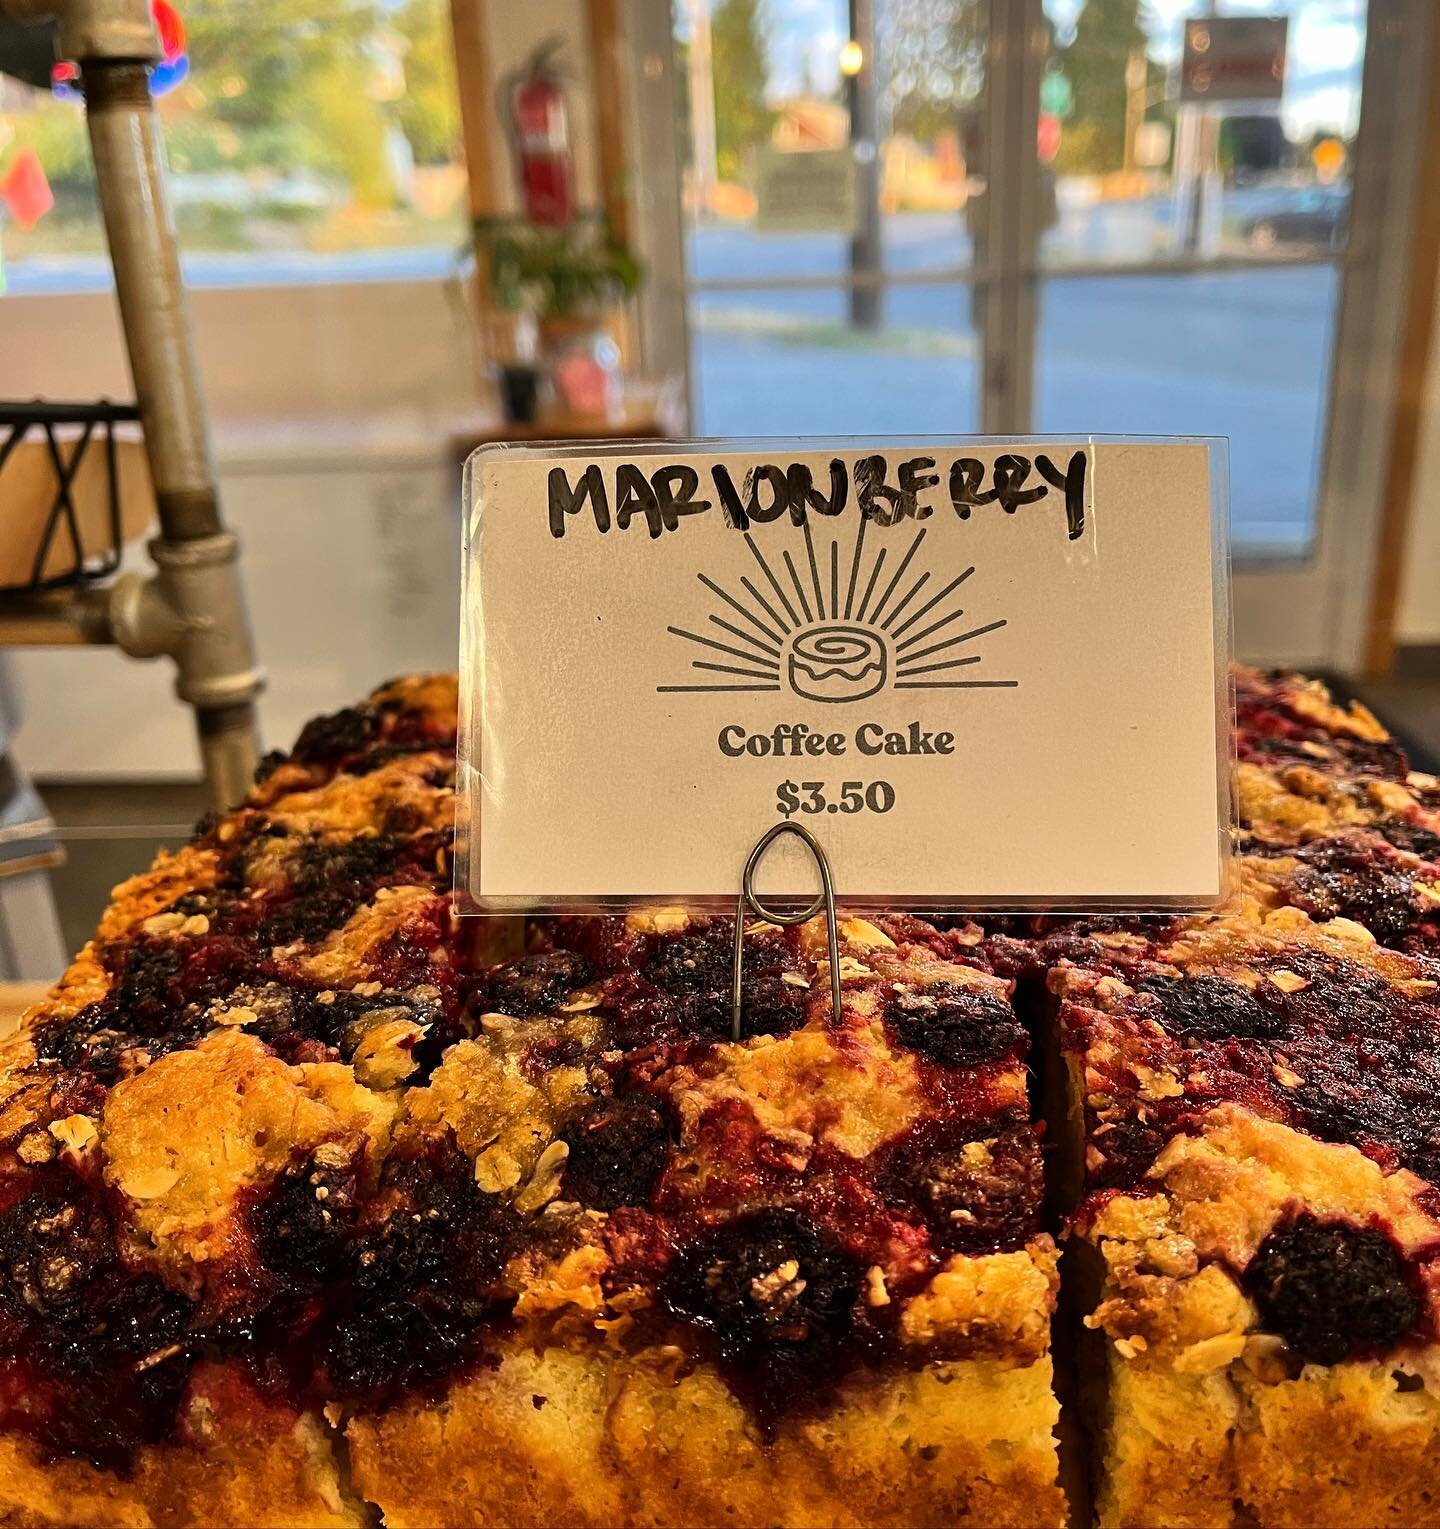 This morning is looking as beautiful as this coffee cake! We have two today featuring Marionberries from one of our regulars! #buenaluz #bakery #portangeles